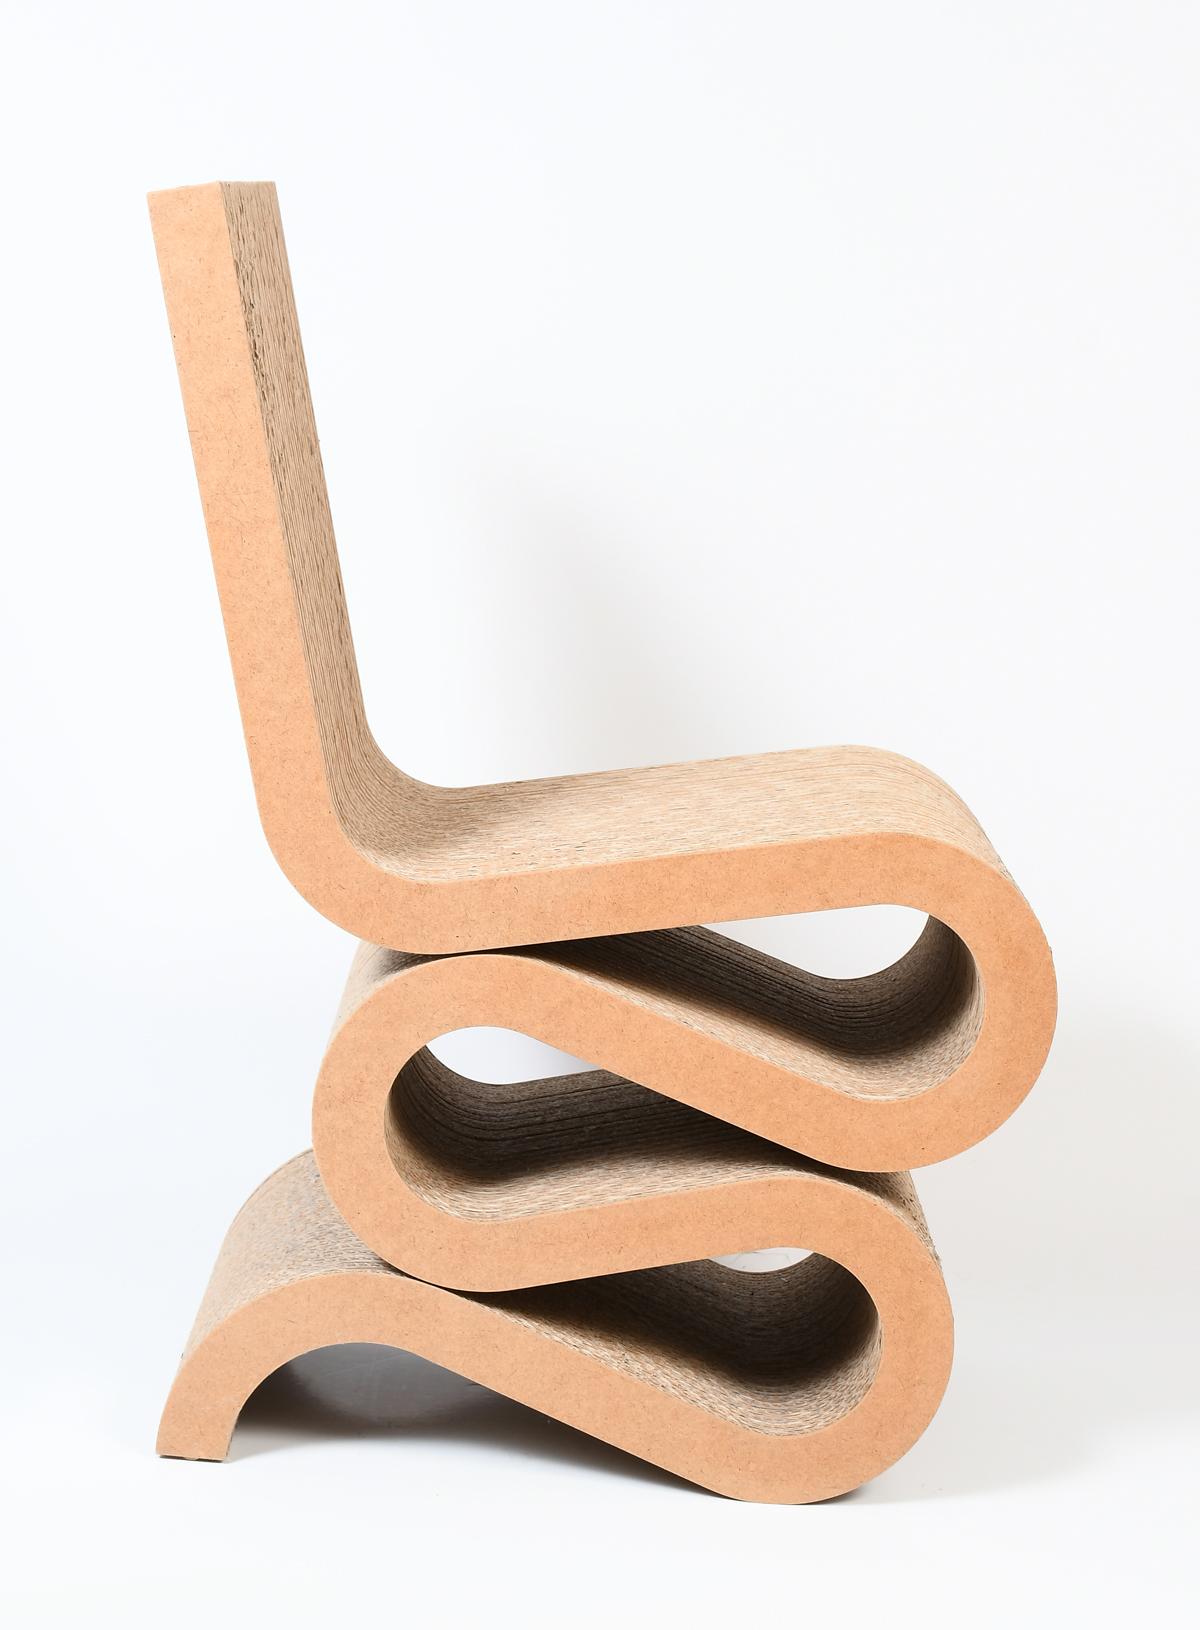 GEHRY WIGGLE CHAIR Approximately 2ed0a3